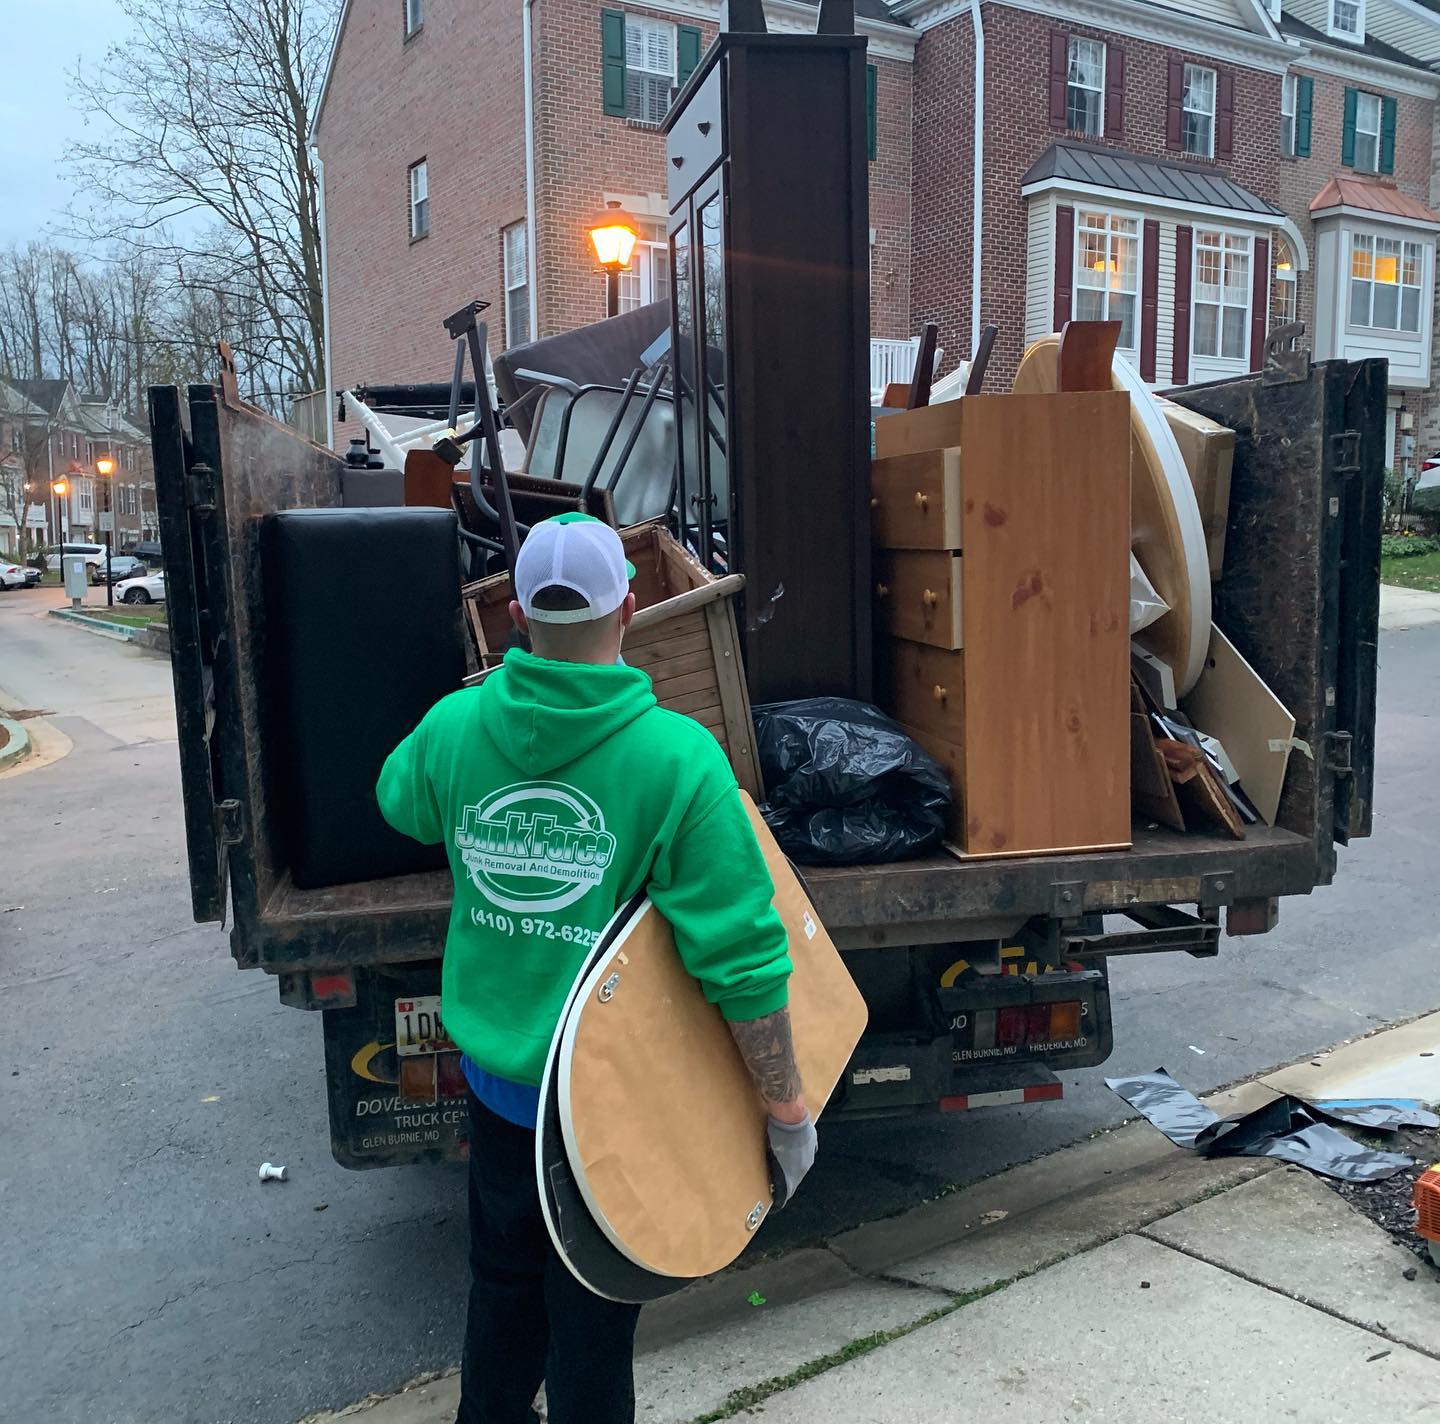 A Junk Force employee carries furniture into their junk removal truck